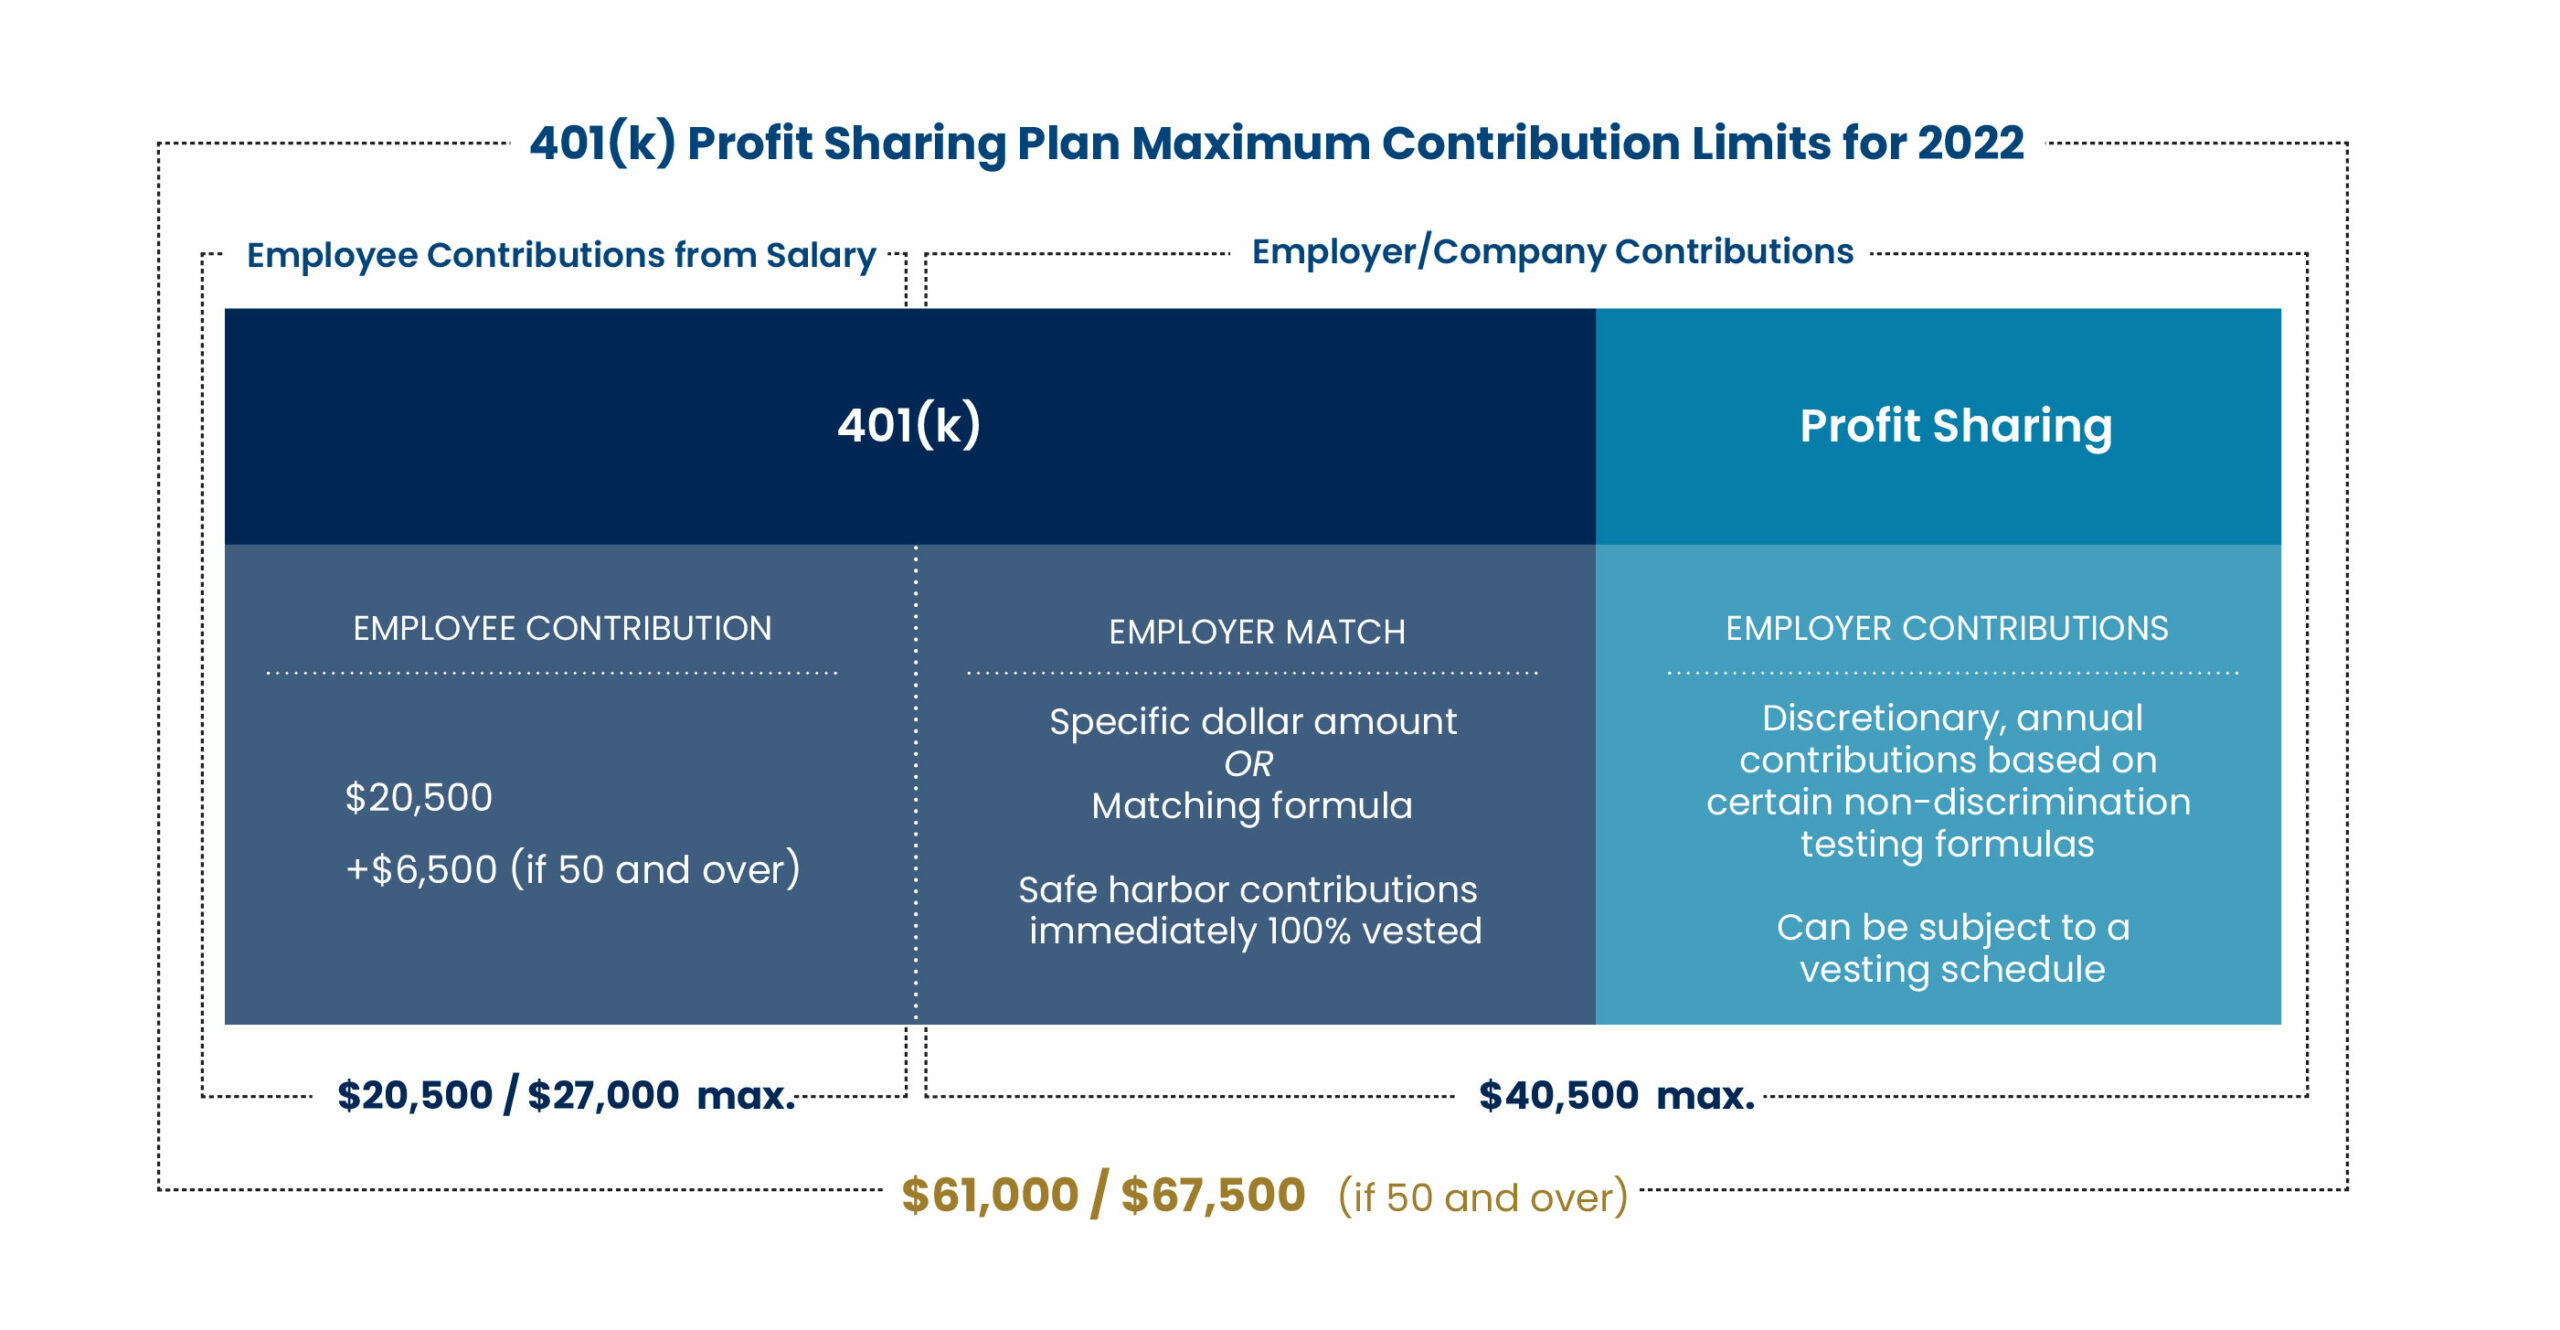 is a profit sharing plan, the same as a 401k